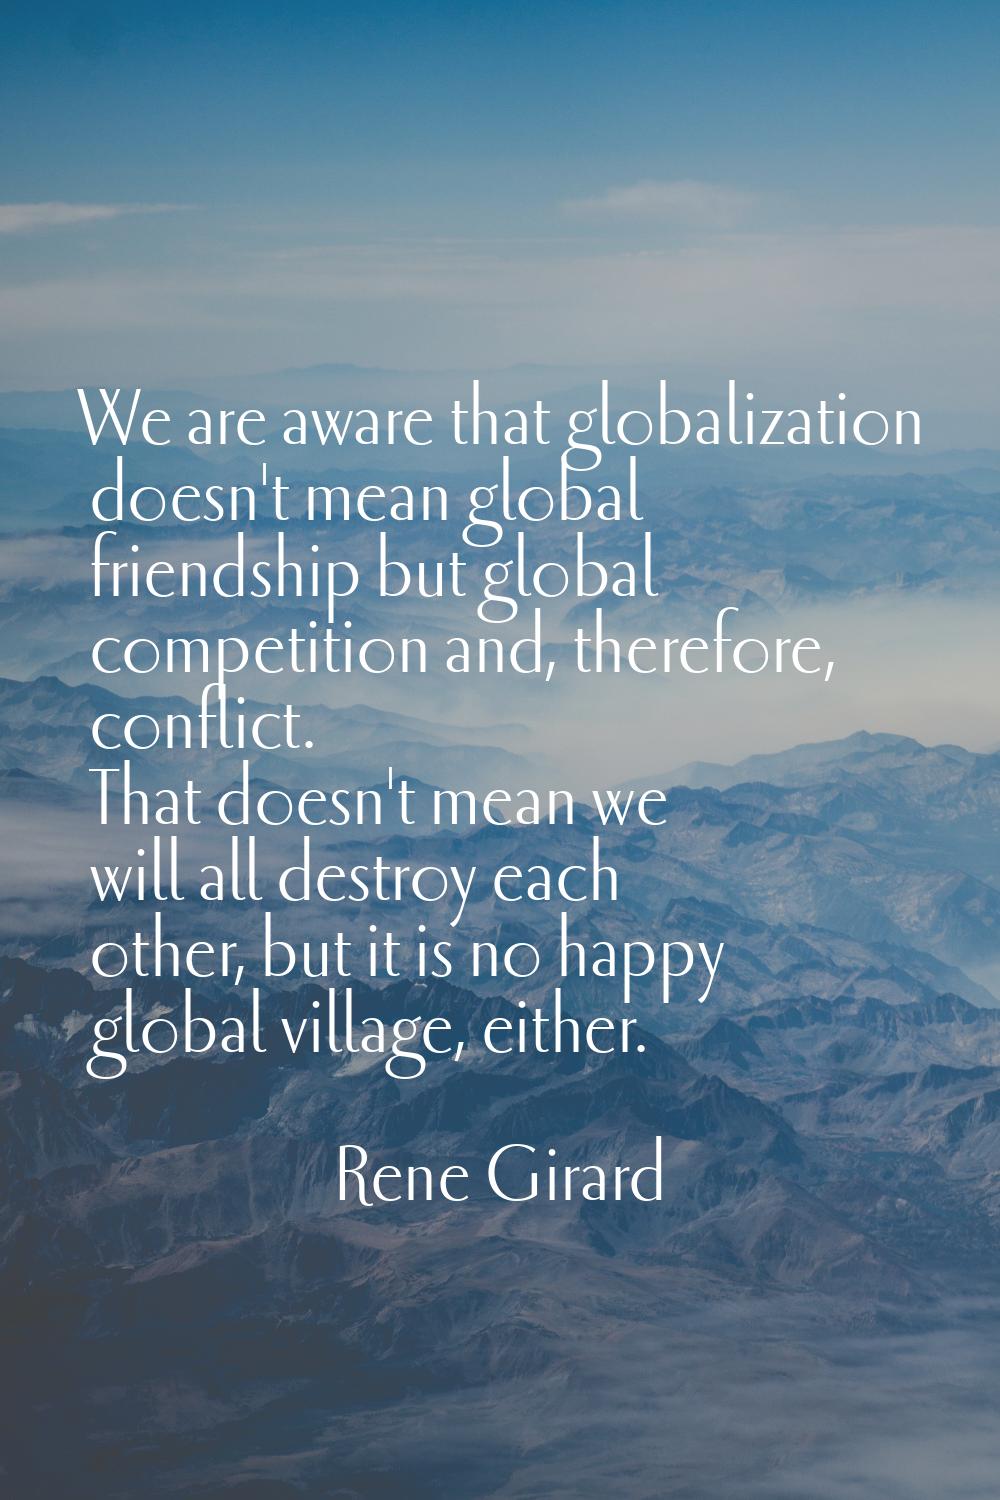 We are aware that globalization doesn't mean global friendship but global competition and, therefor